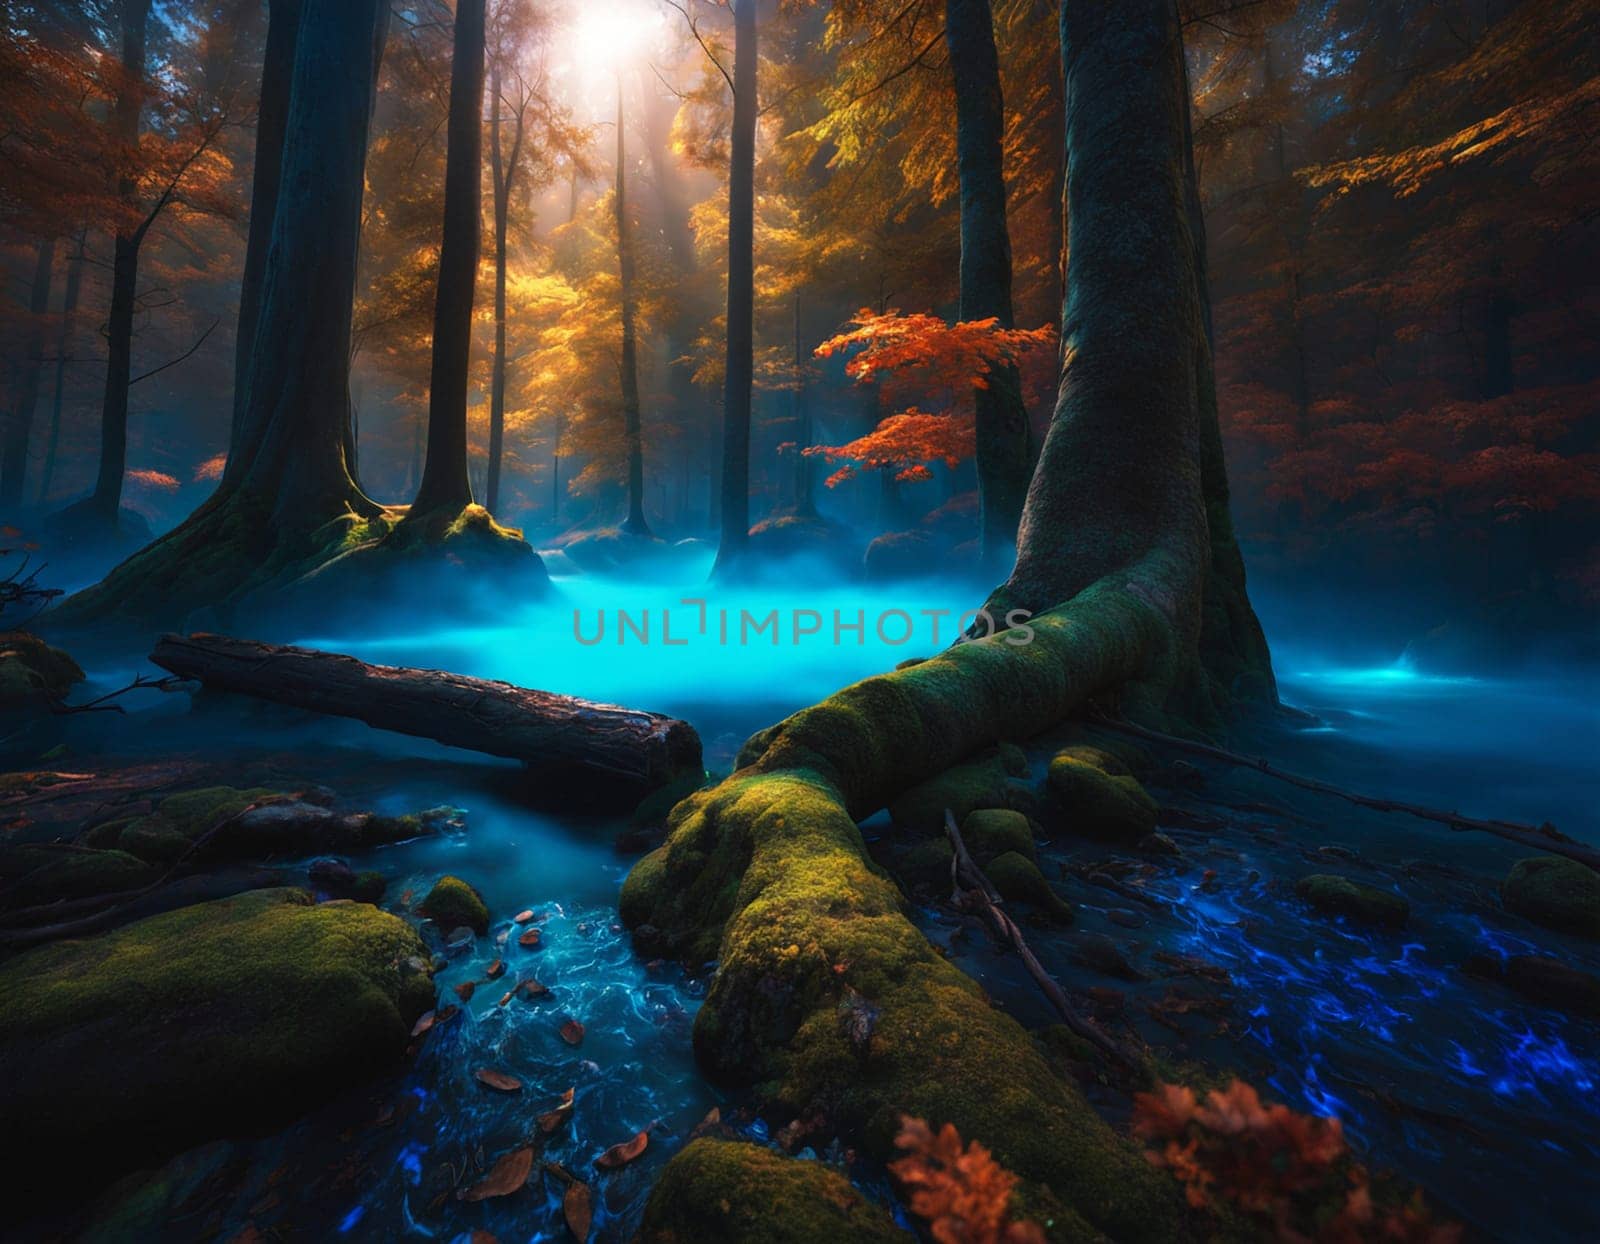 A river in a beautiful forest. High quality illustration